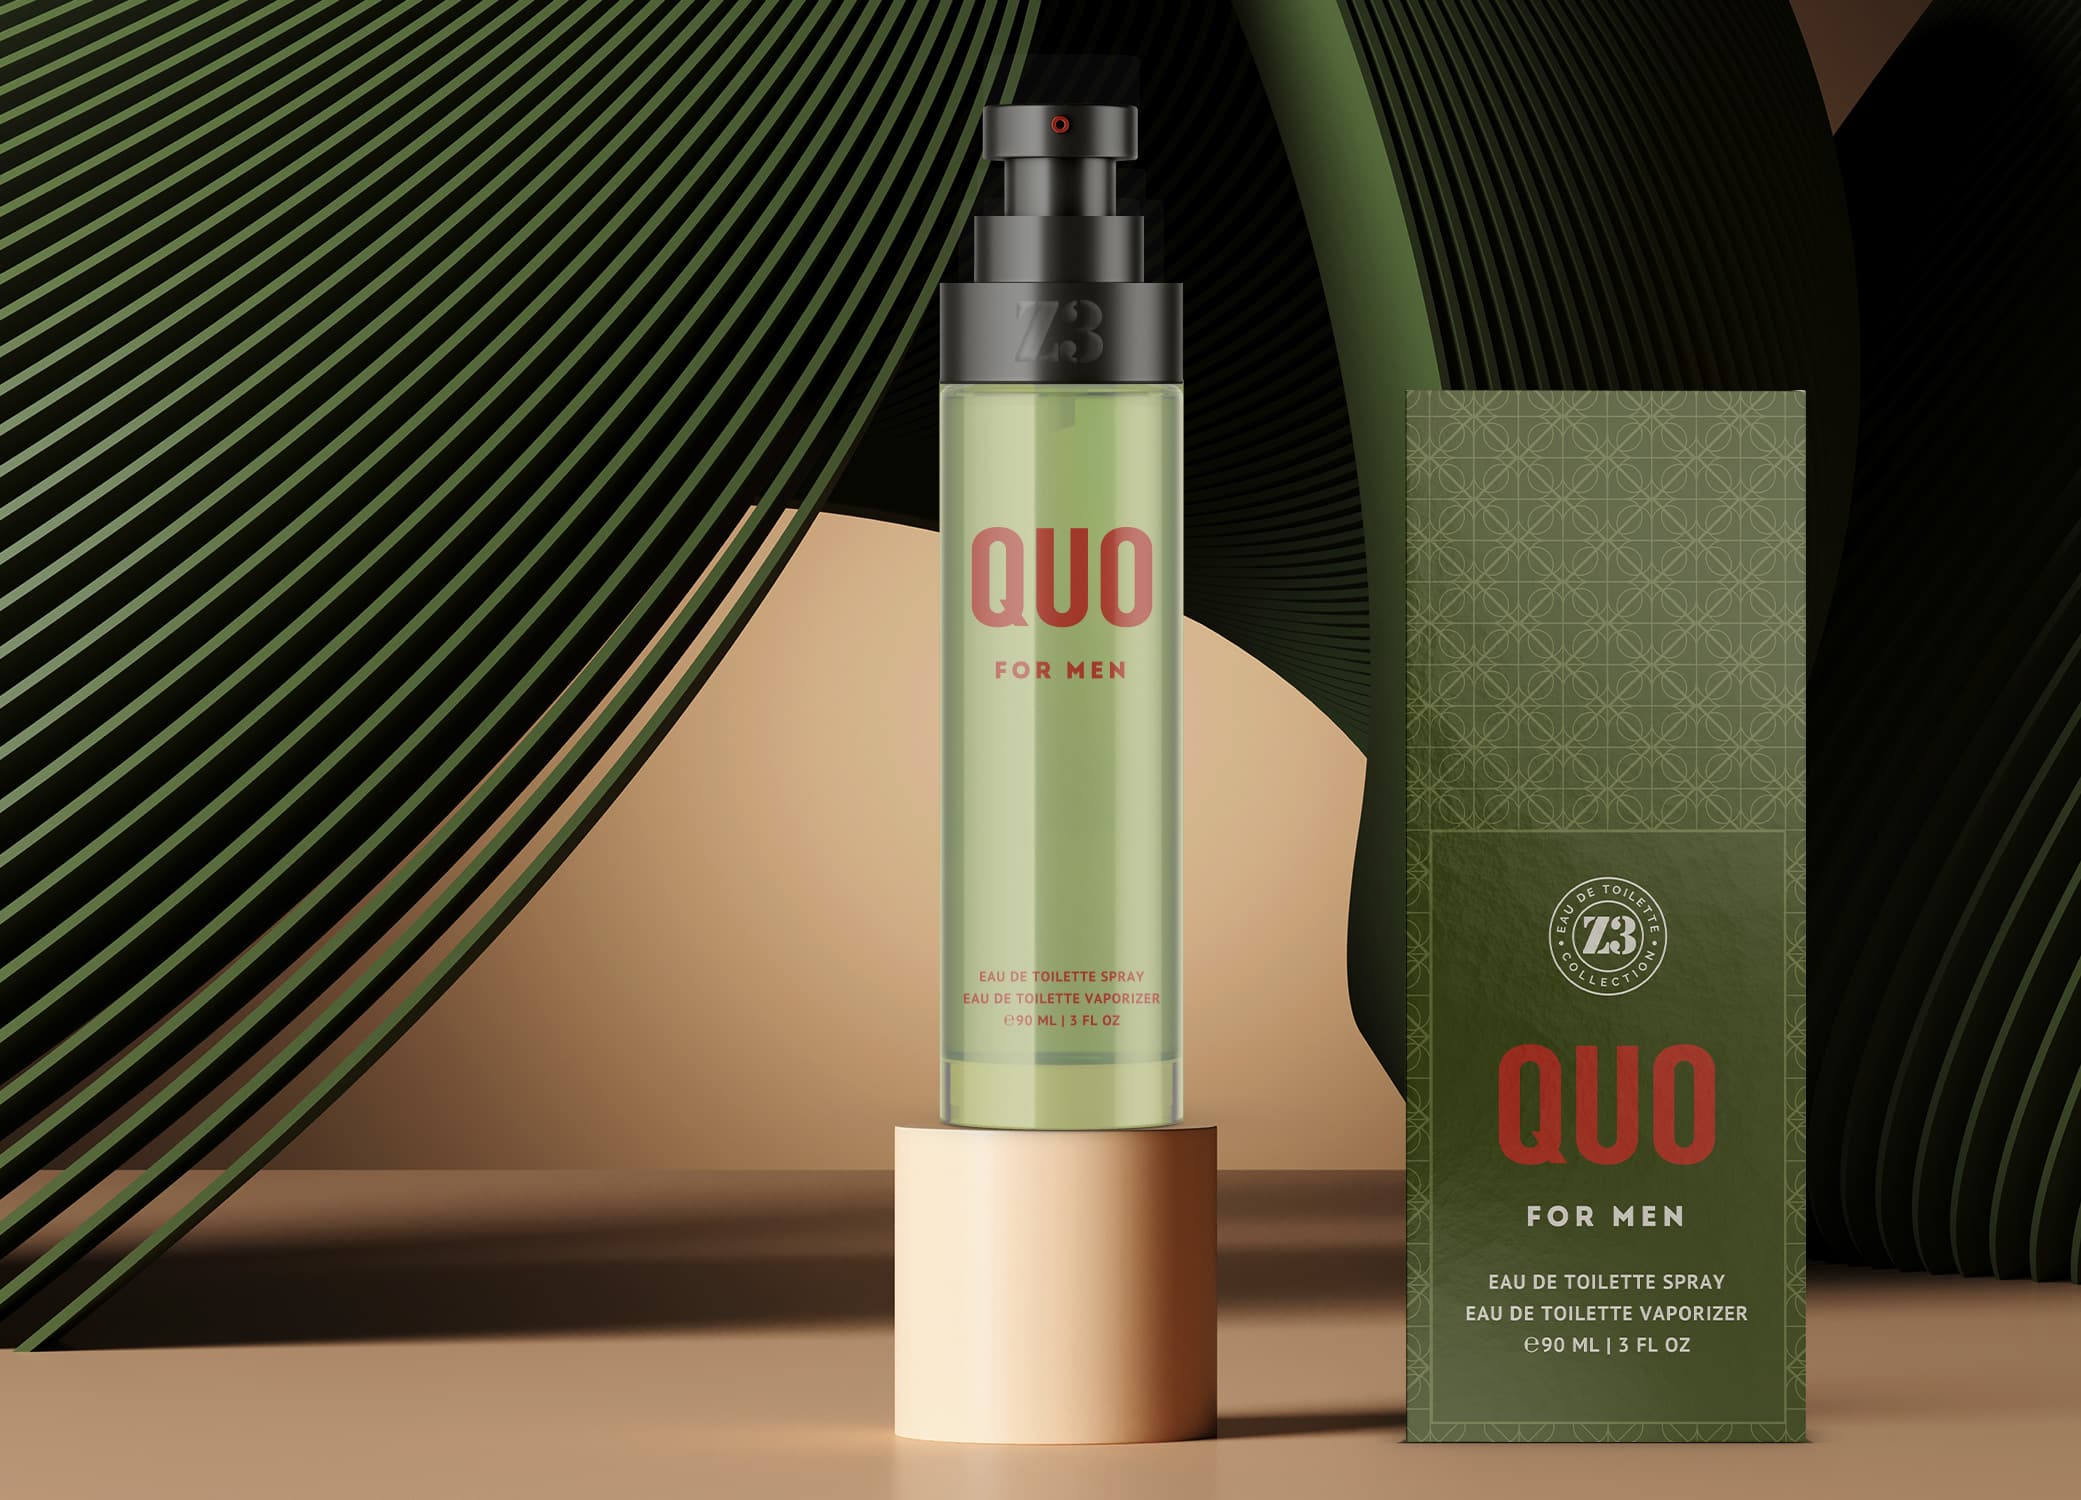 YZY Perfume men's fragrance bottle and package design in olive and rust with ornate pattern for Z3 Quo product.